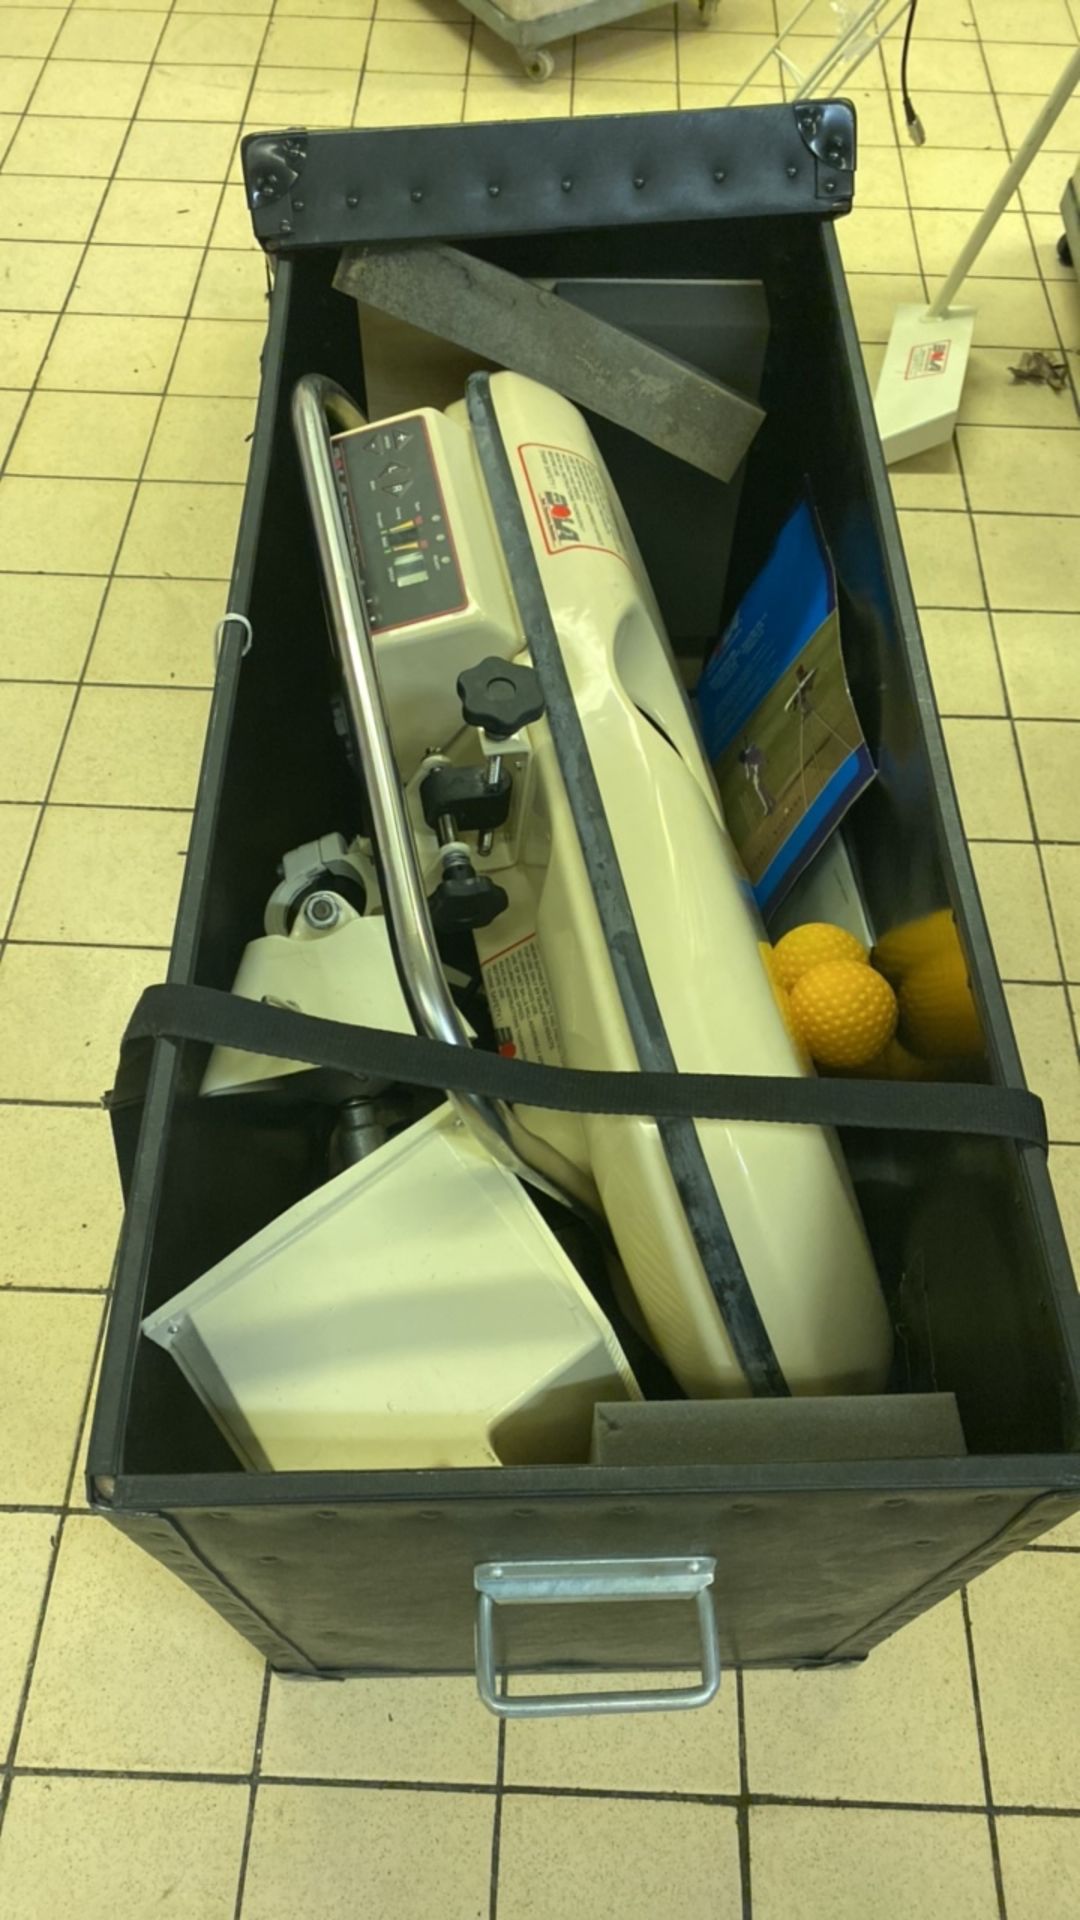 BOLA Auto Feeder Indoor Bowling Machine - Image 7 of 8